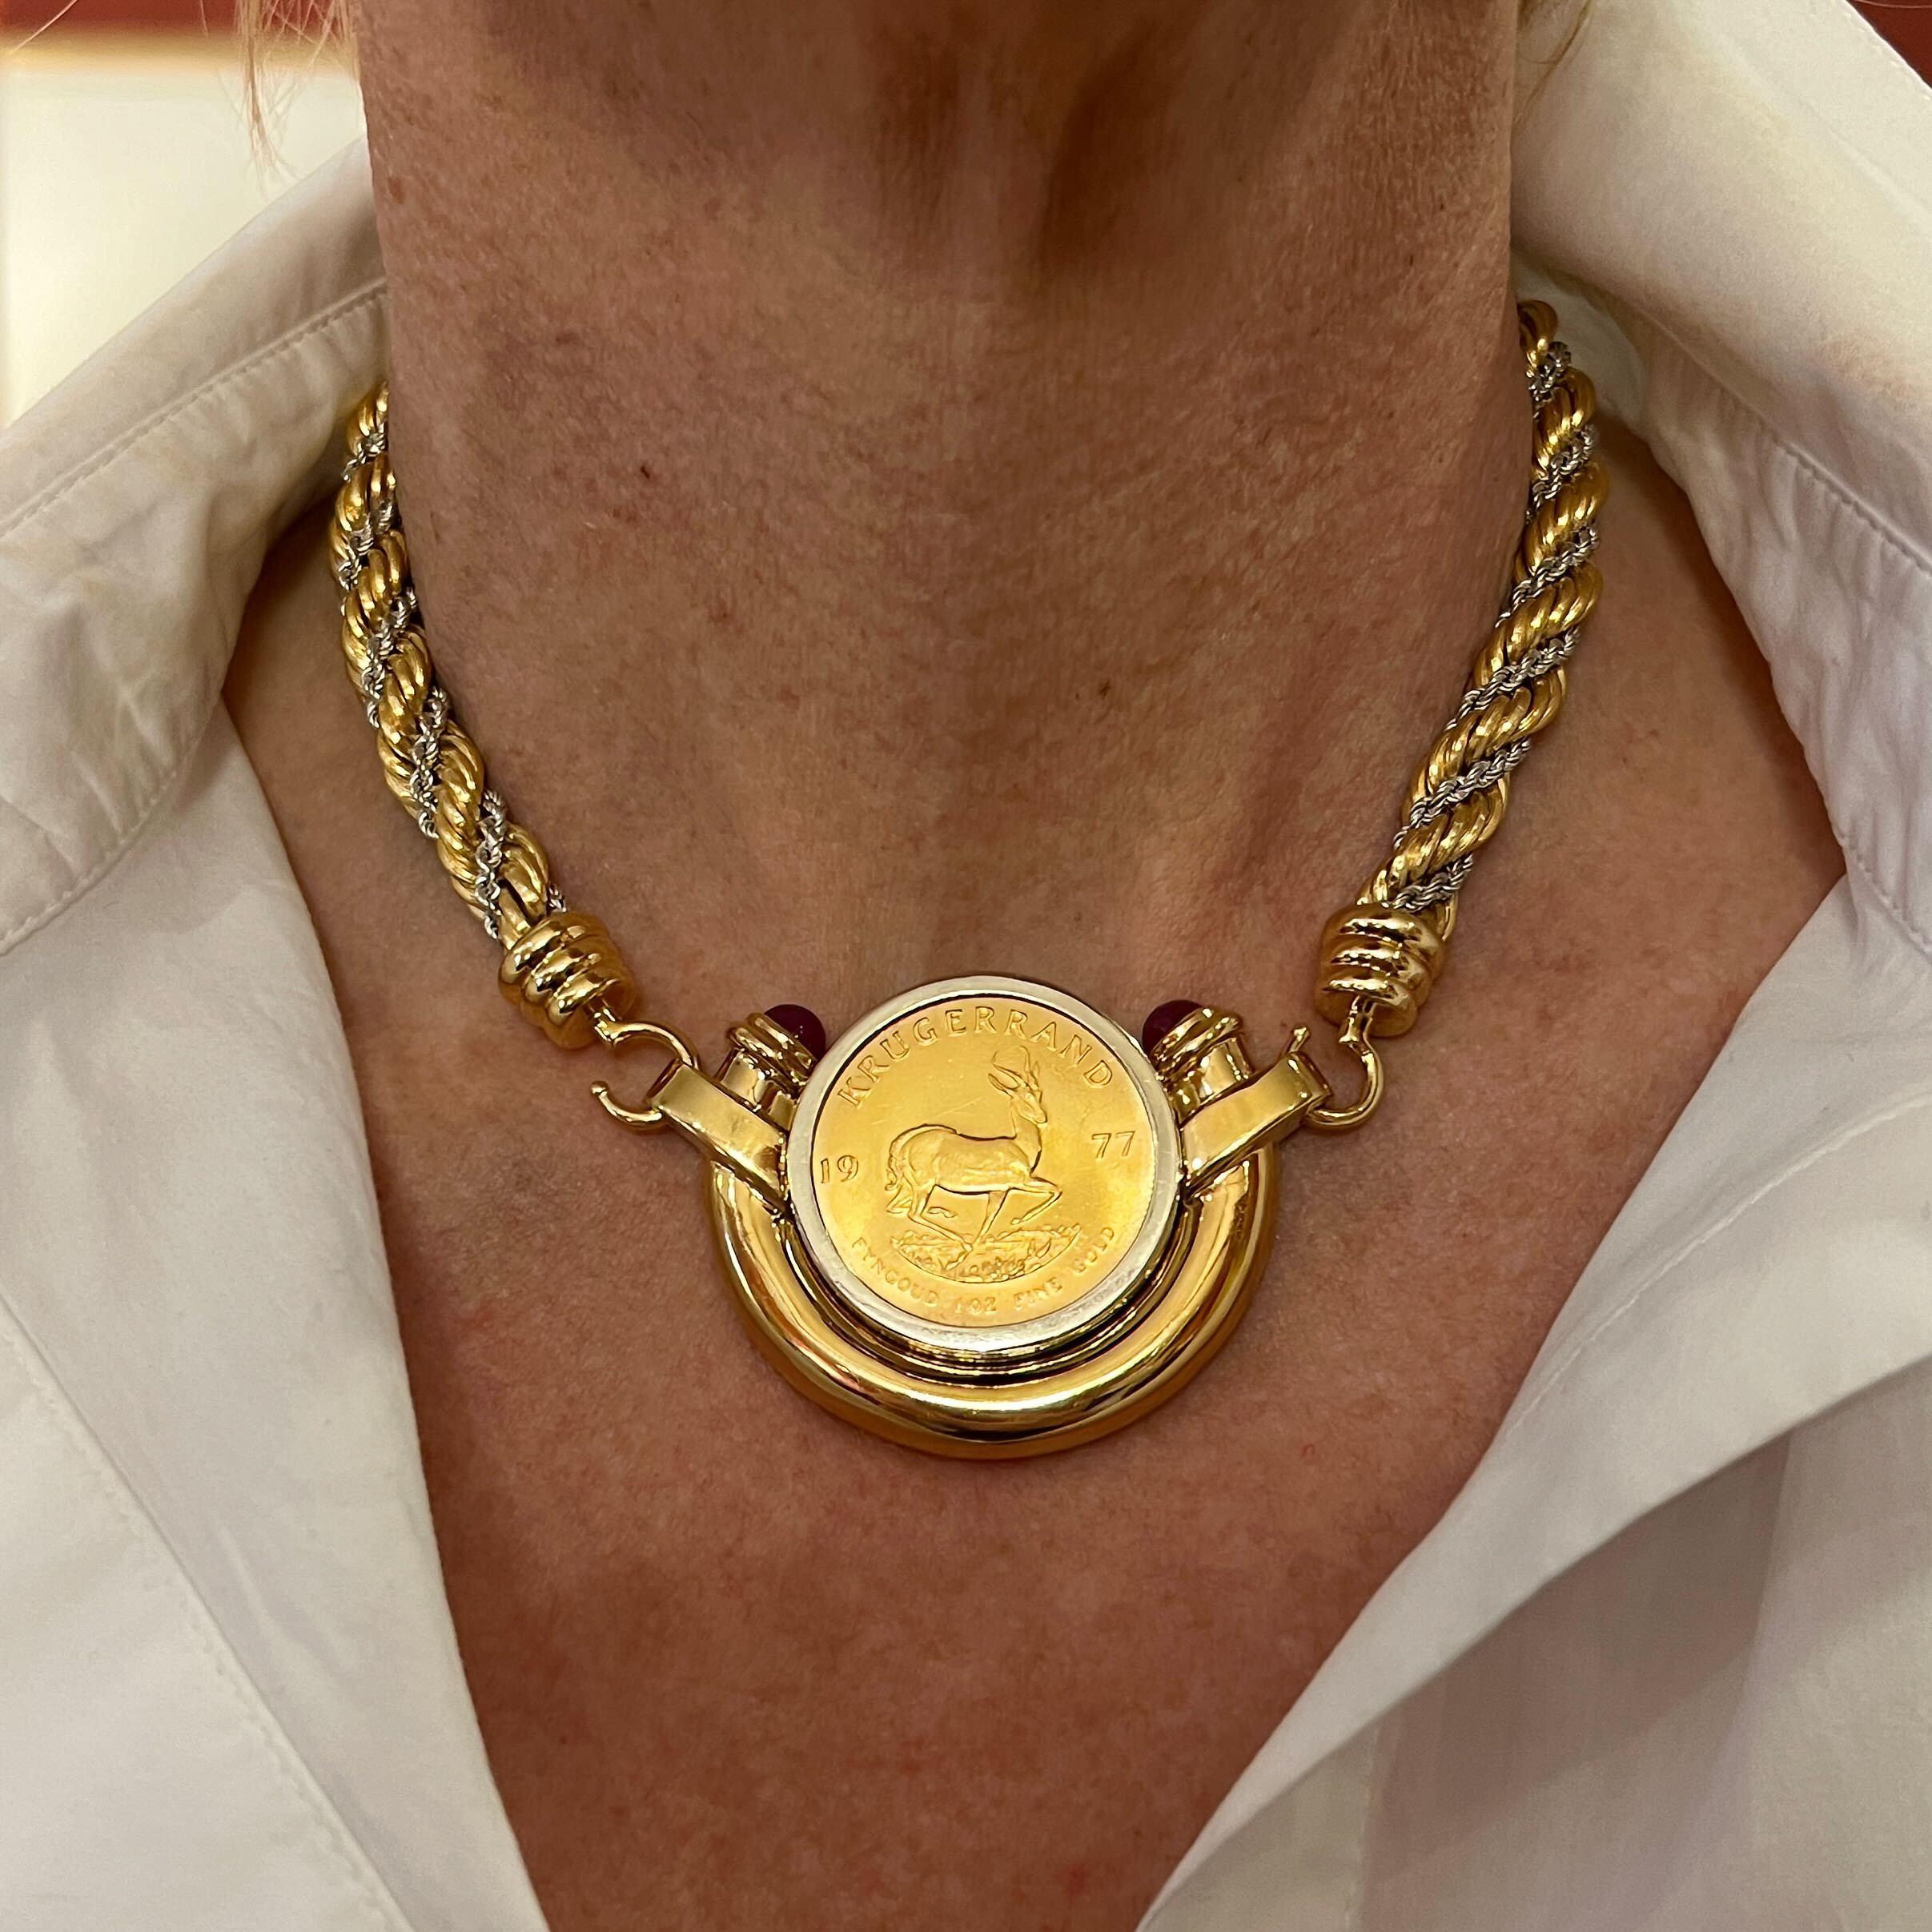 ORLANDA OLSEN Krugerrand Coin Gold Necklace In Good Condition For Sale In New York, NY